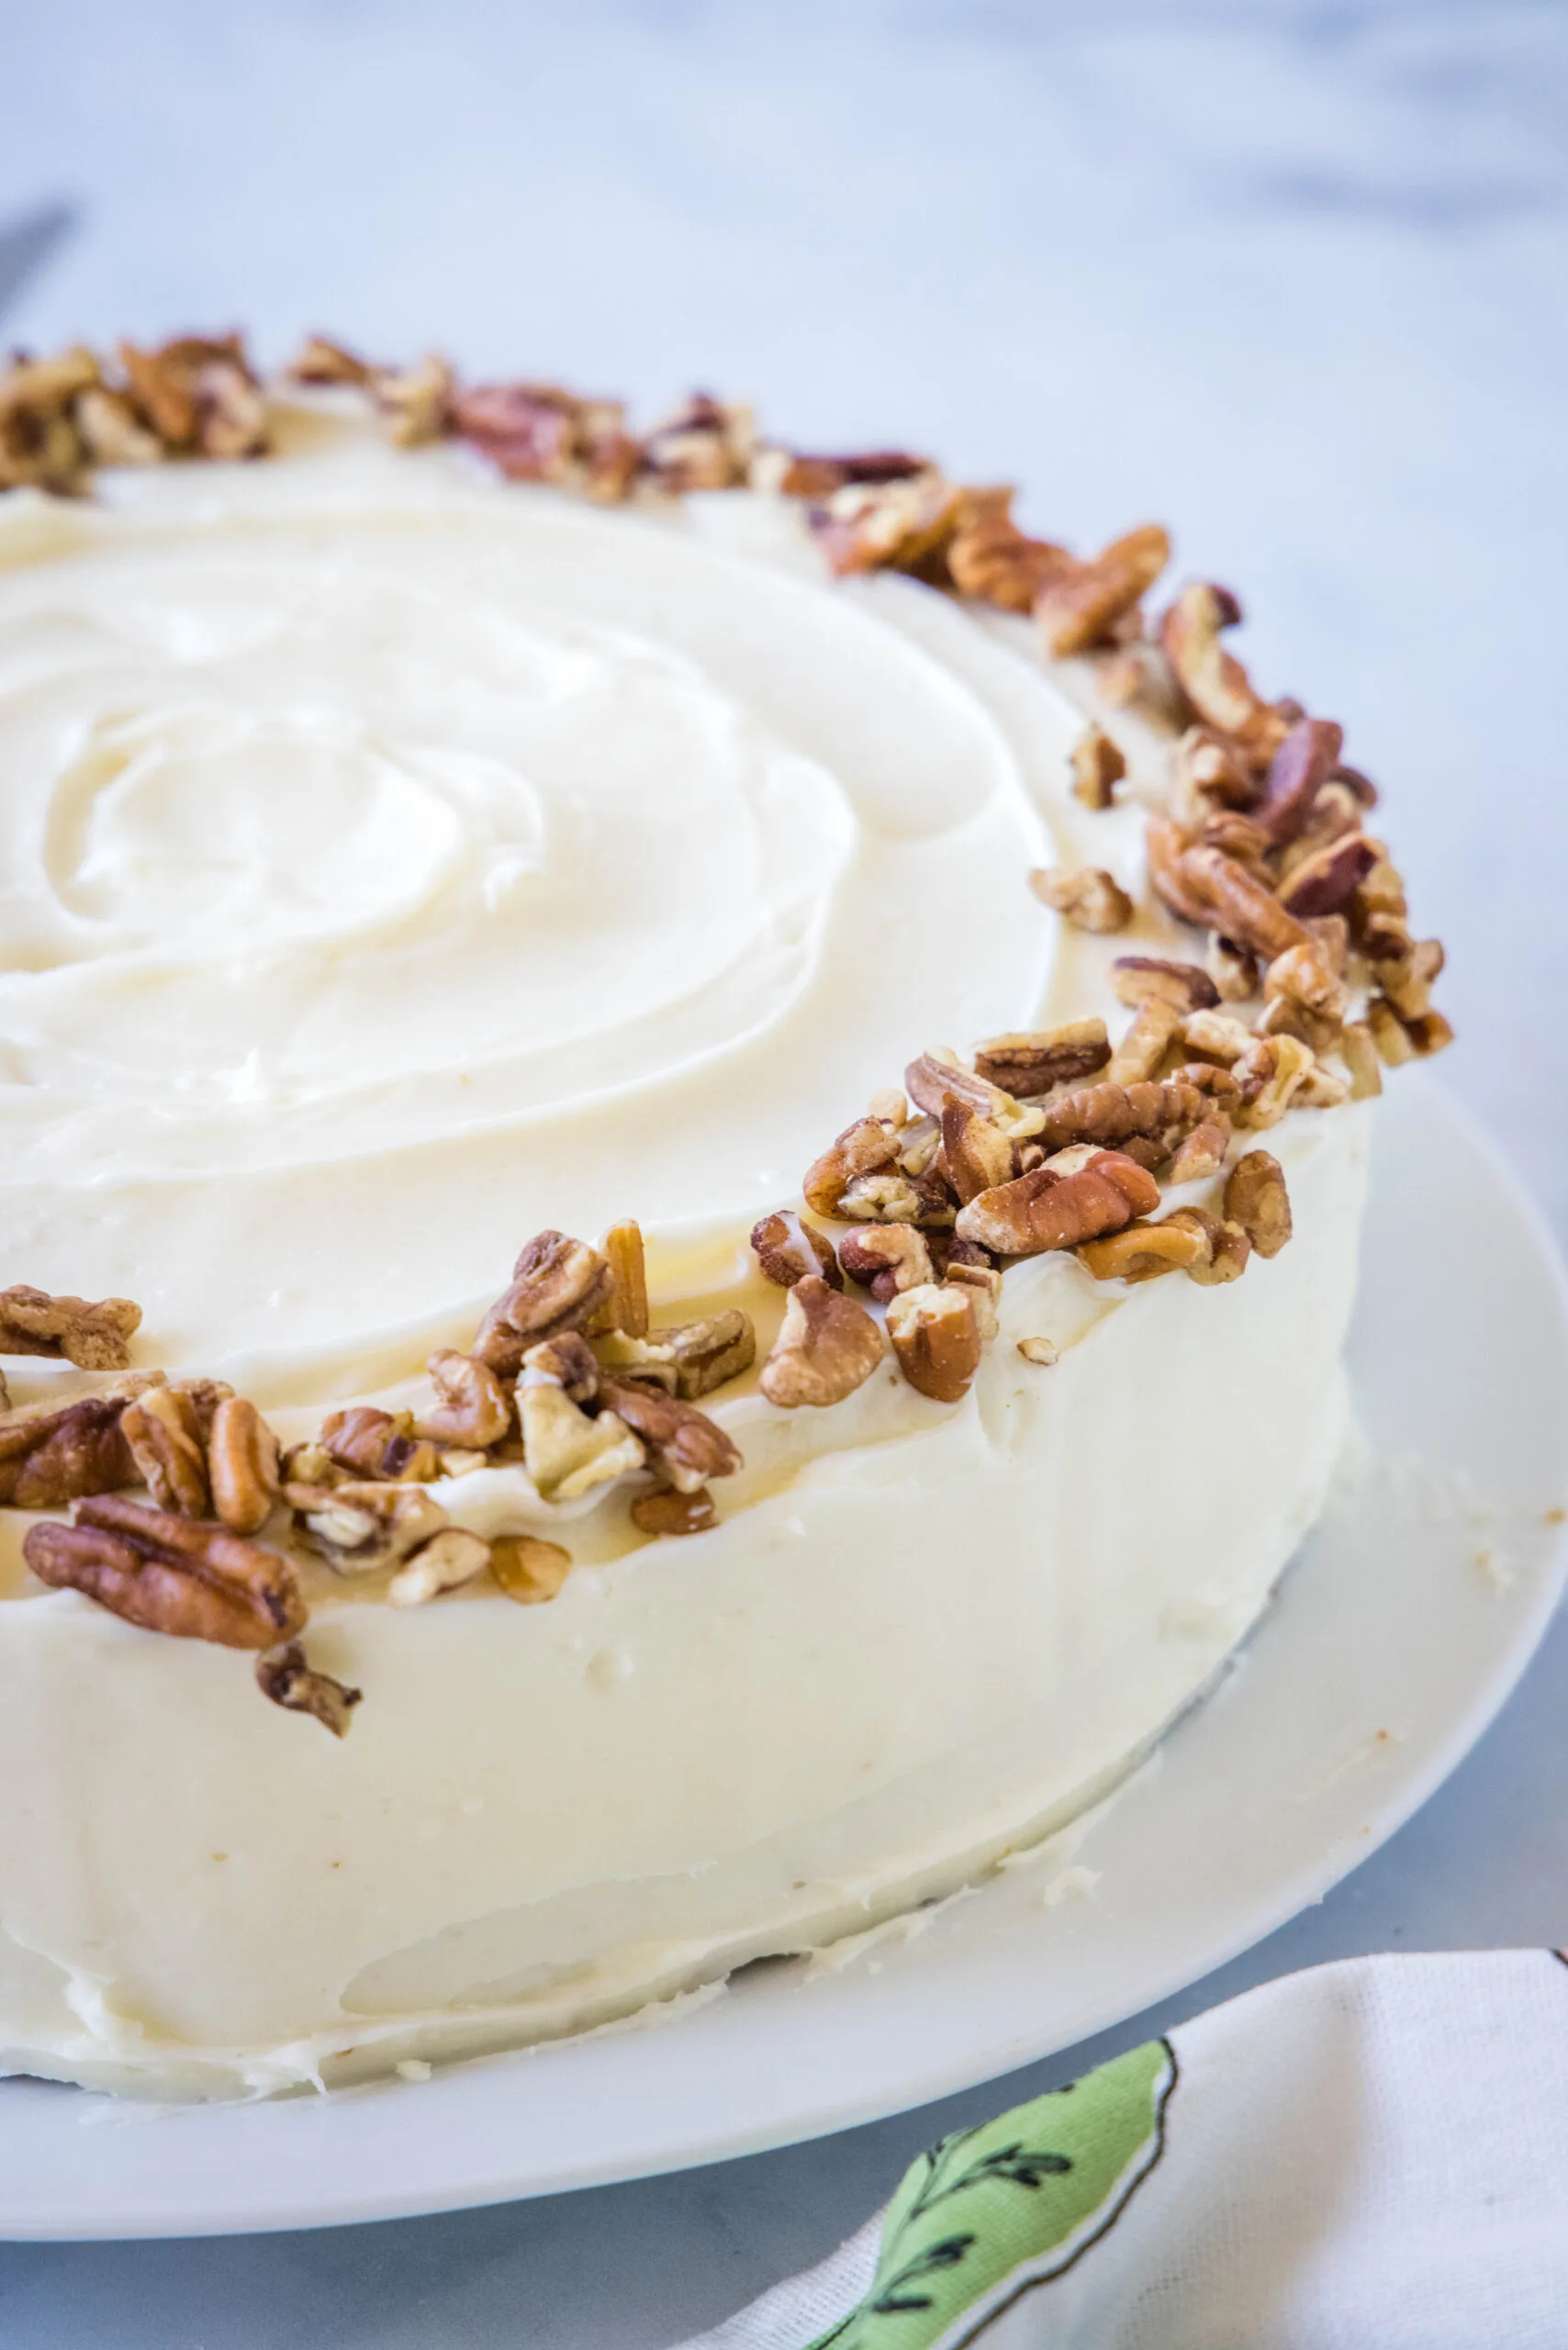 A whole carrot cake frosted with cream cheese frosting and garnished with chopped pecans.